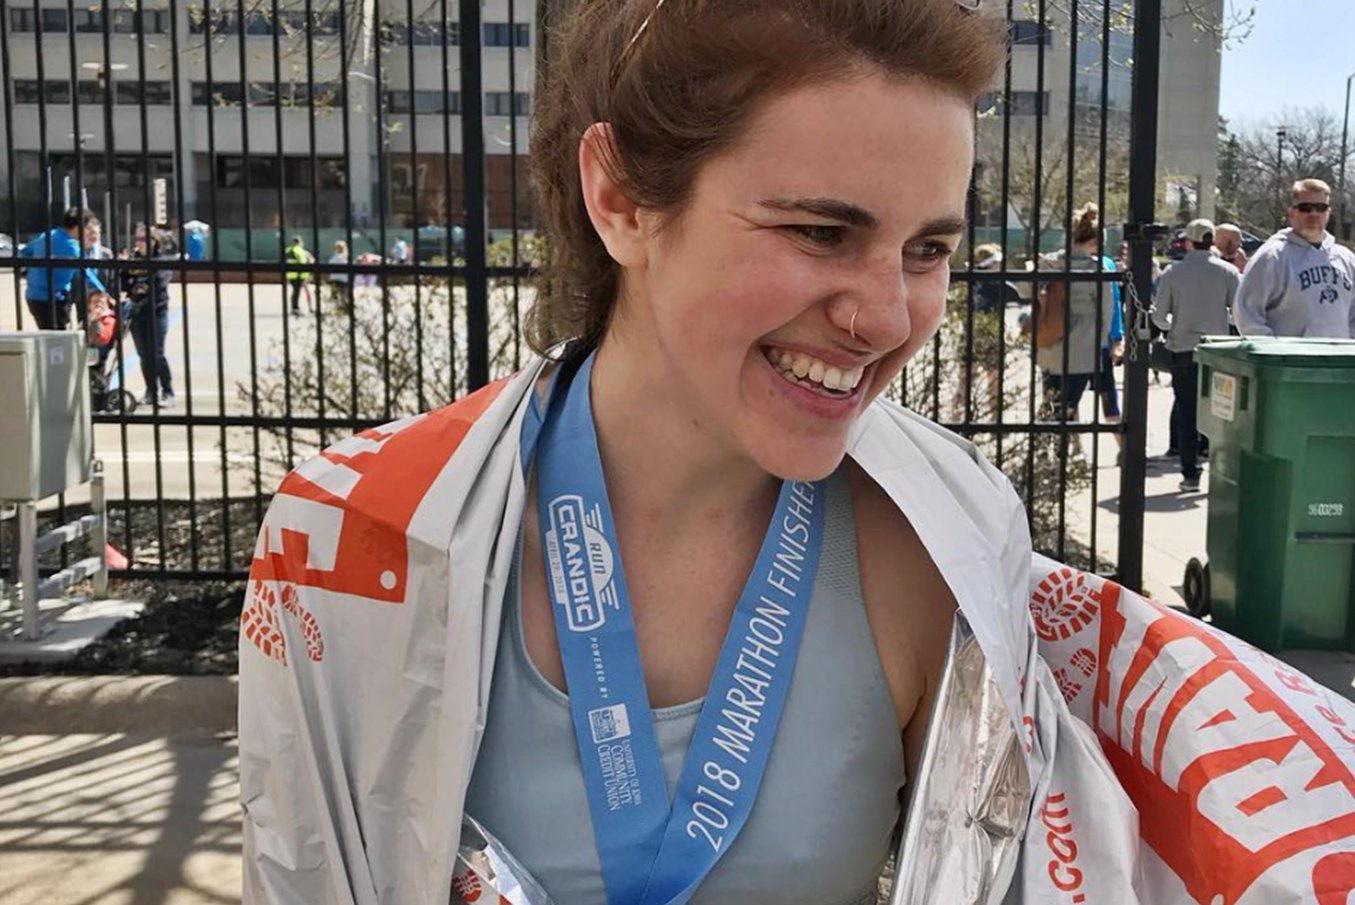 Lucia smiles gratefully wearing a 2018 Marathon Finisher medal around her neck and a marathon flag wrapped around her shoulders